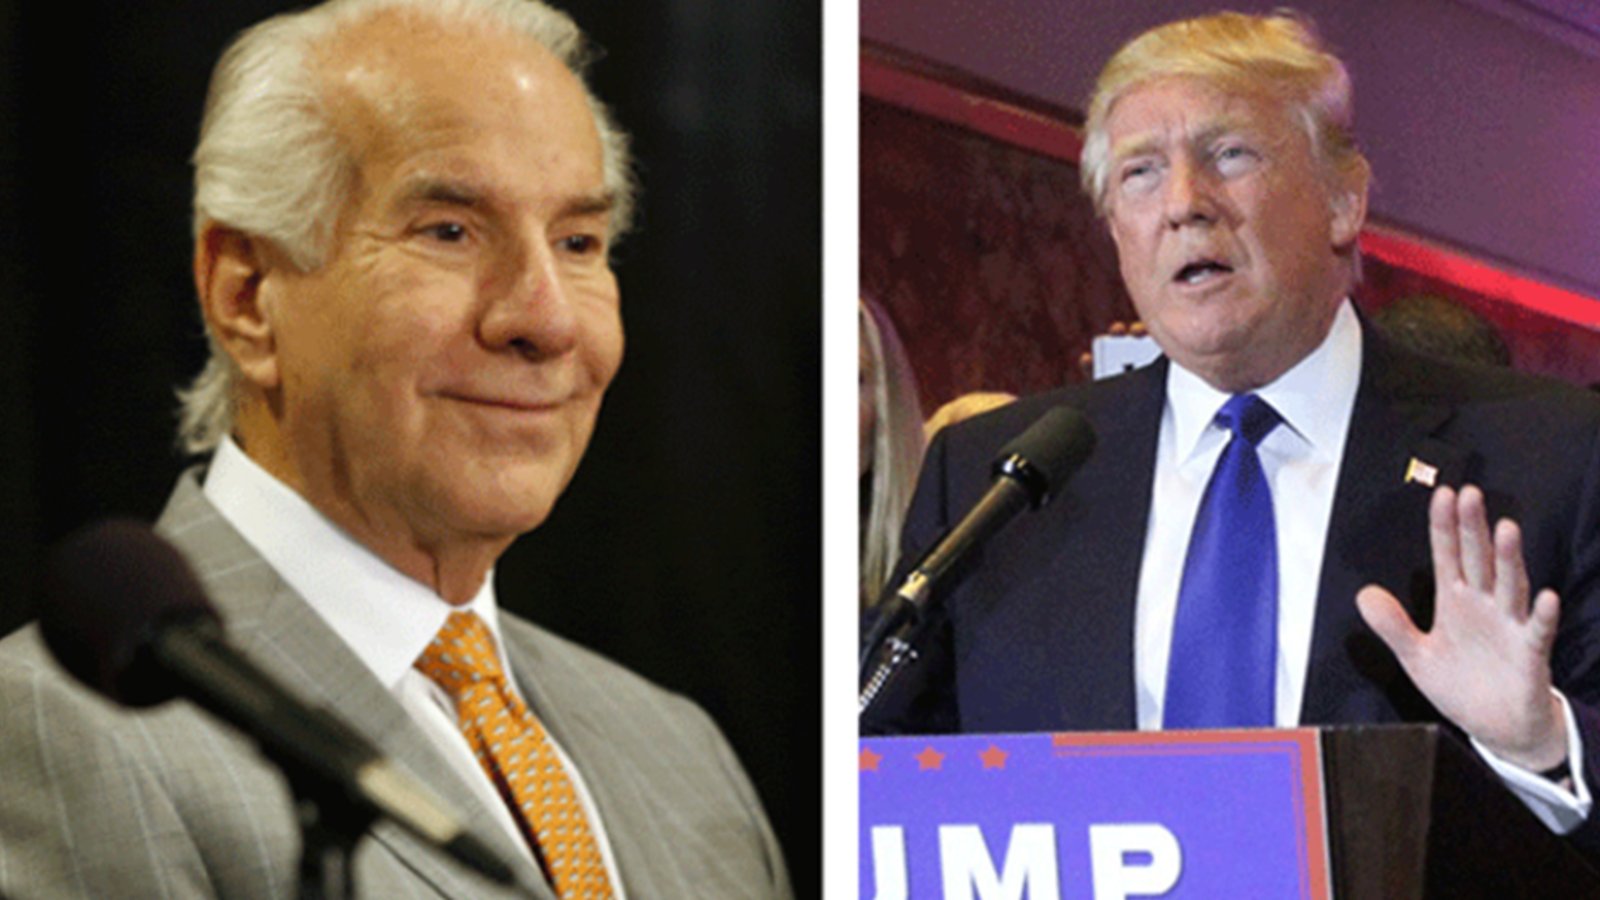 The time Ed Snider kicked Donald Trump out of his suite because he wouldn’t shut up